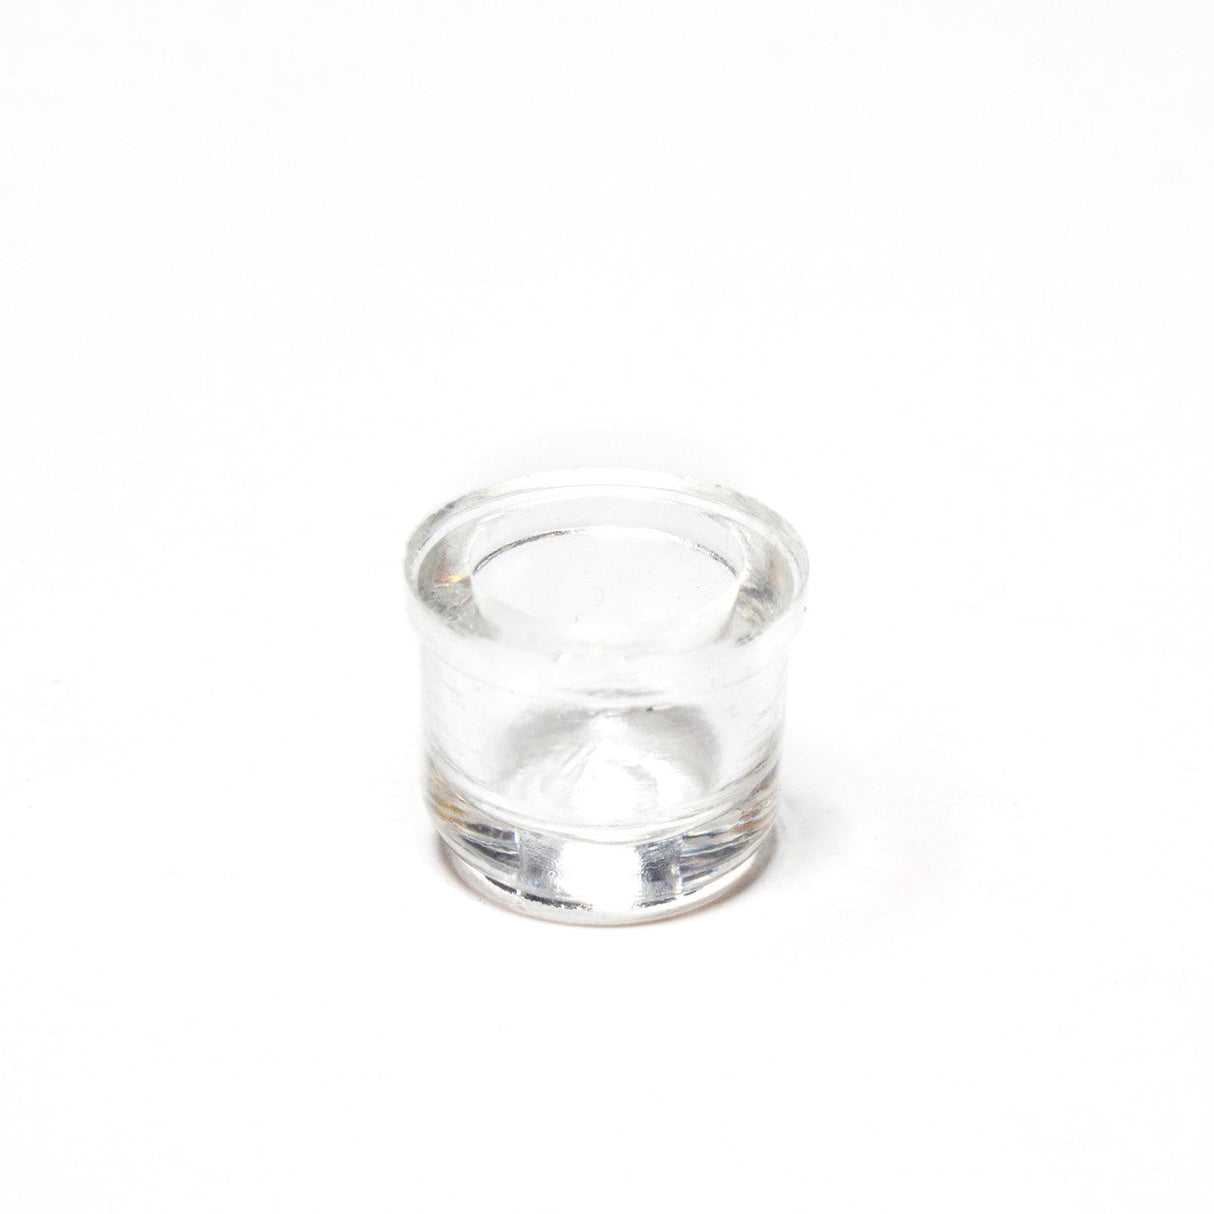 Solopipe clear borosilicate glass bowl accessory, compact and portable, top view on white background